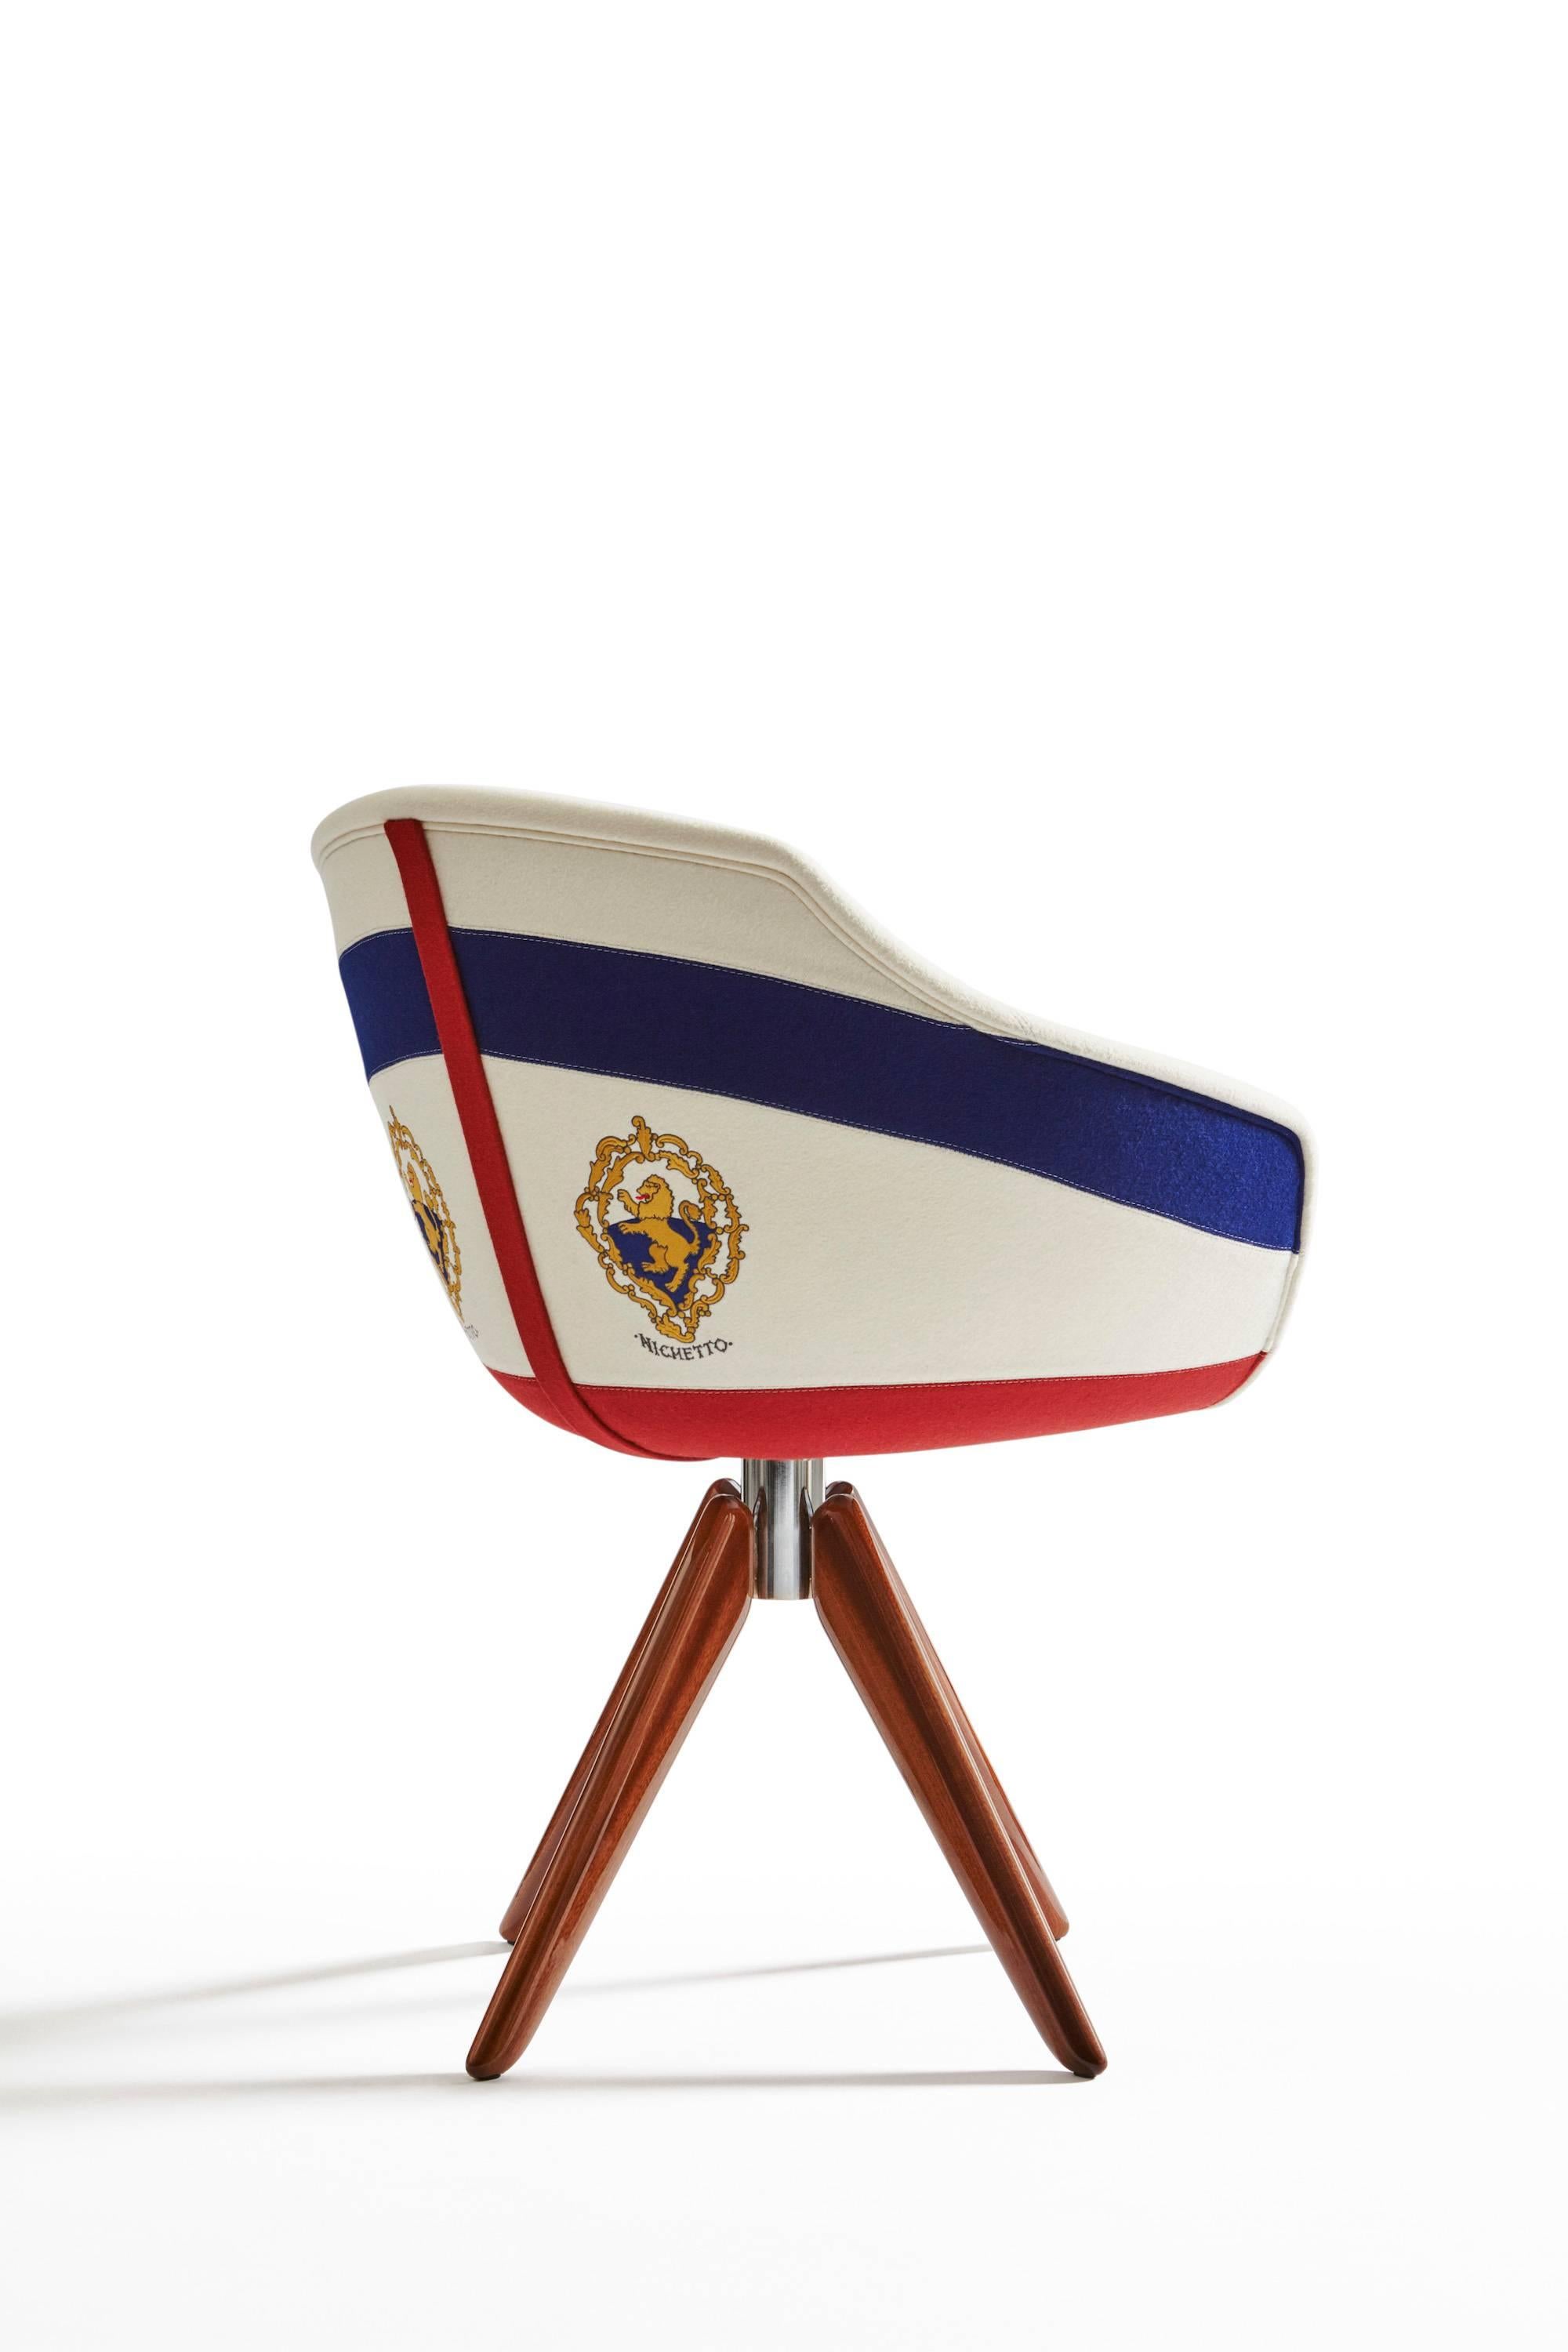 Steel Moooi Canal Chair by Luca Nichetto in Seven Fabric Stripe & Three Base Options For Sale